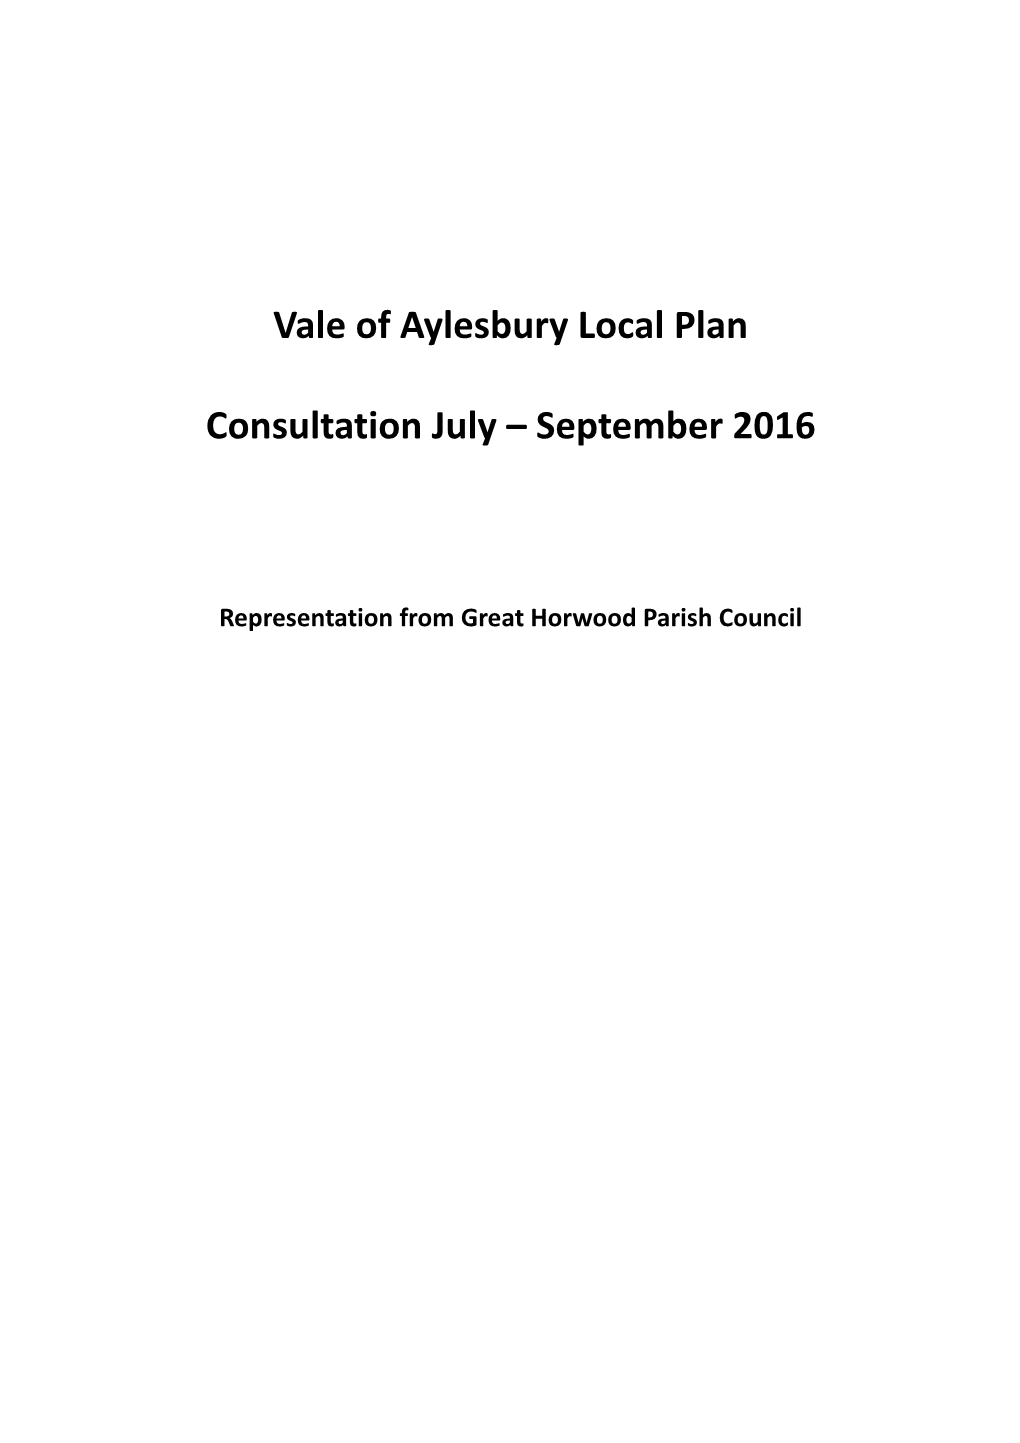 Vale of Aylesbury Local Plan Consultation July – September 2016